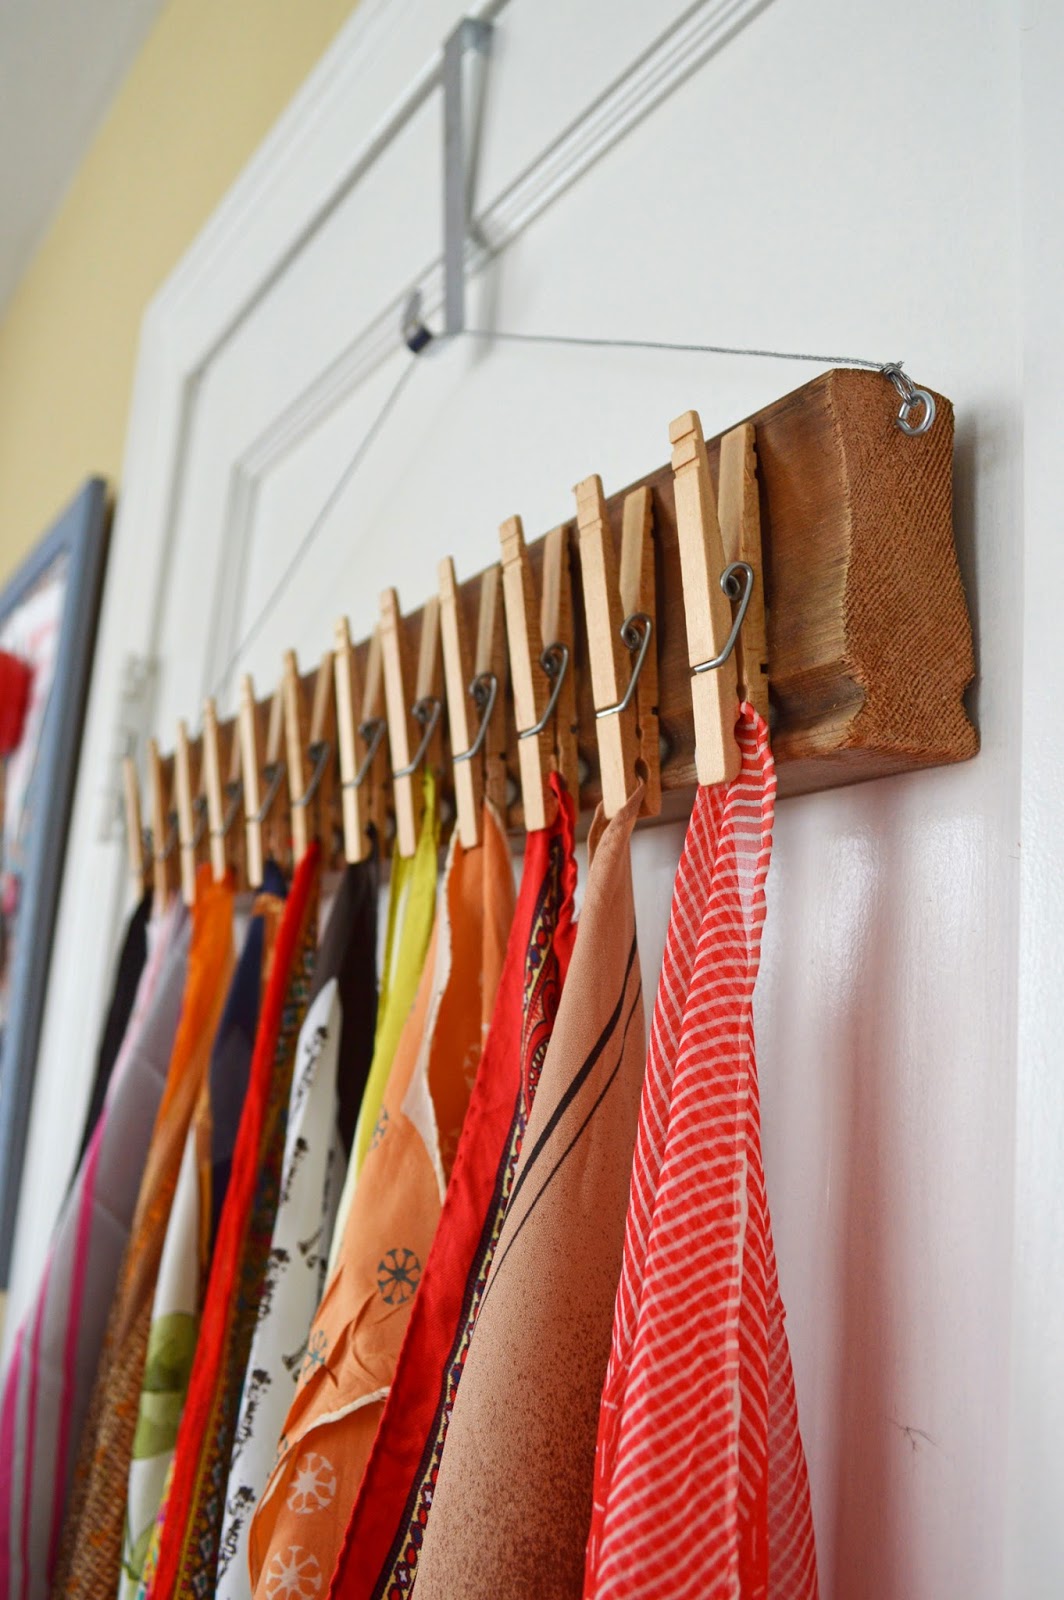 Make a lovely scarf display by gluing clothespins to a pretty board and hanging on your wall or door